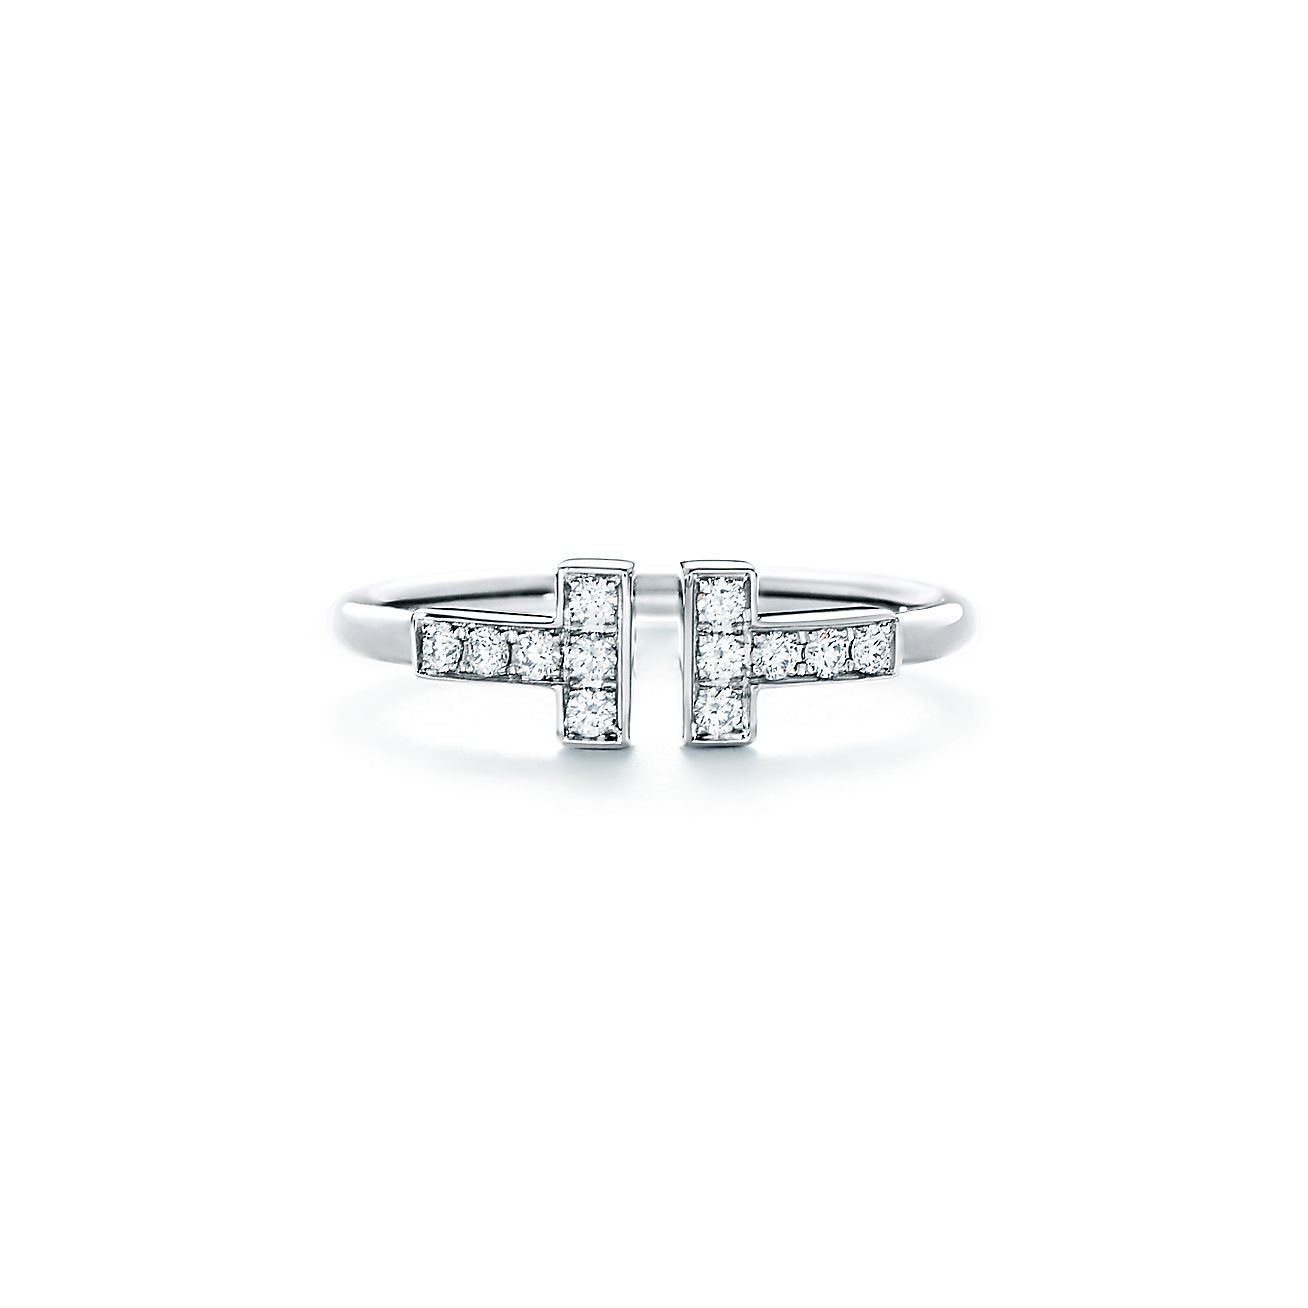 Tiffany T diamond wire ring in 18k white gold.